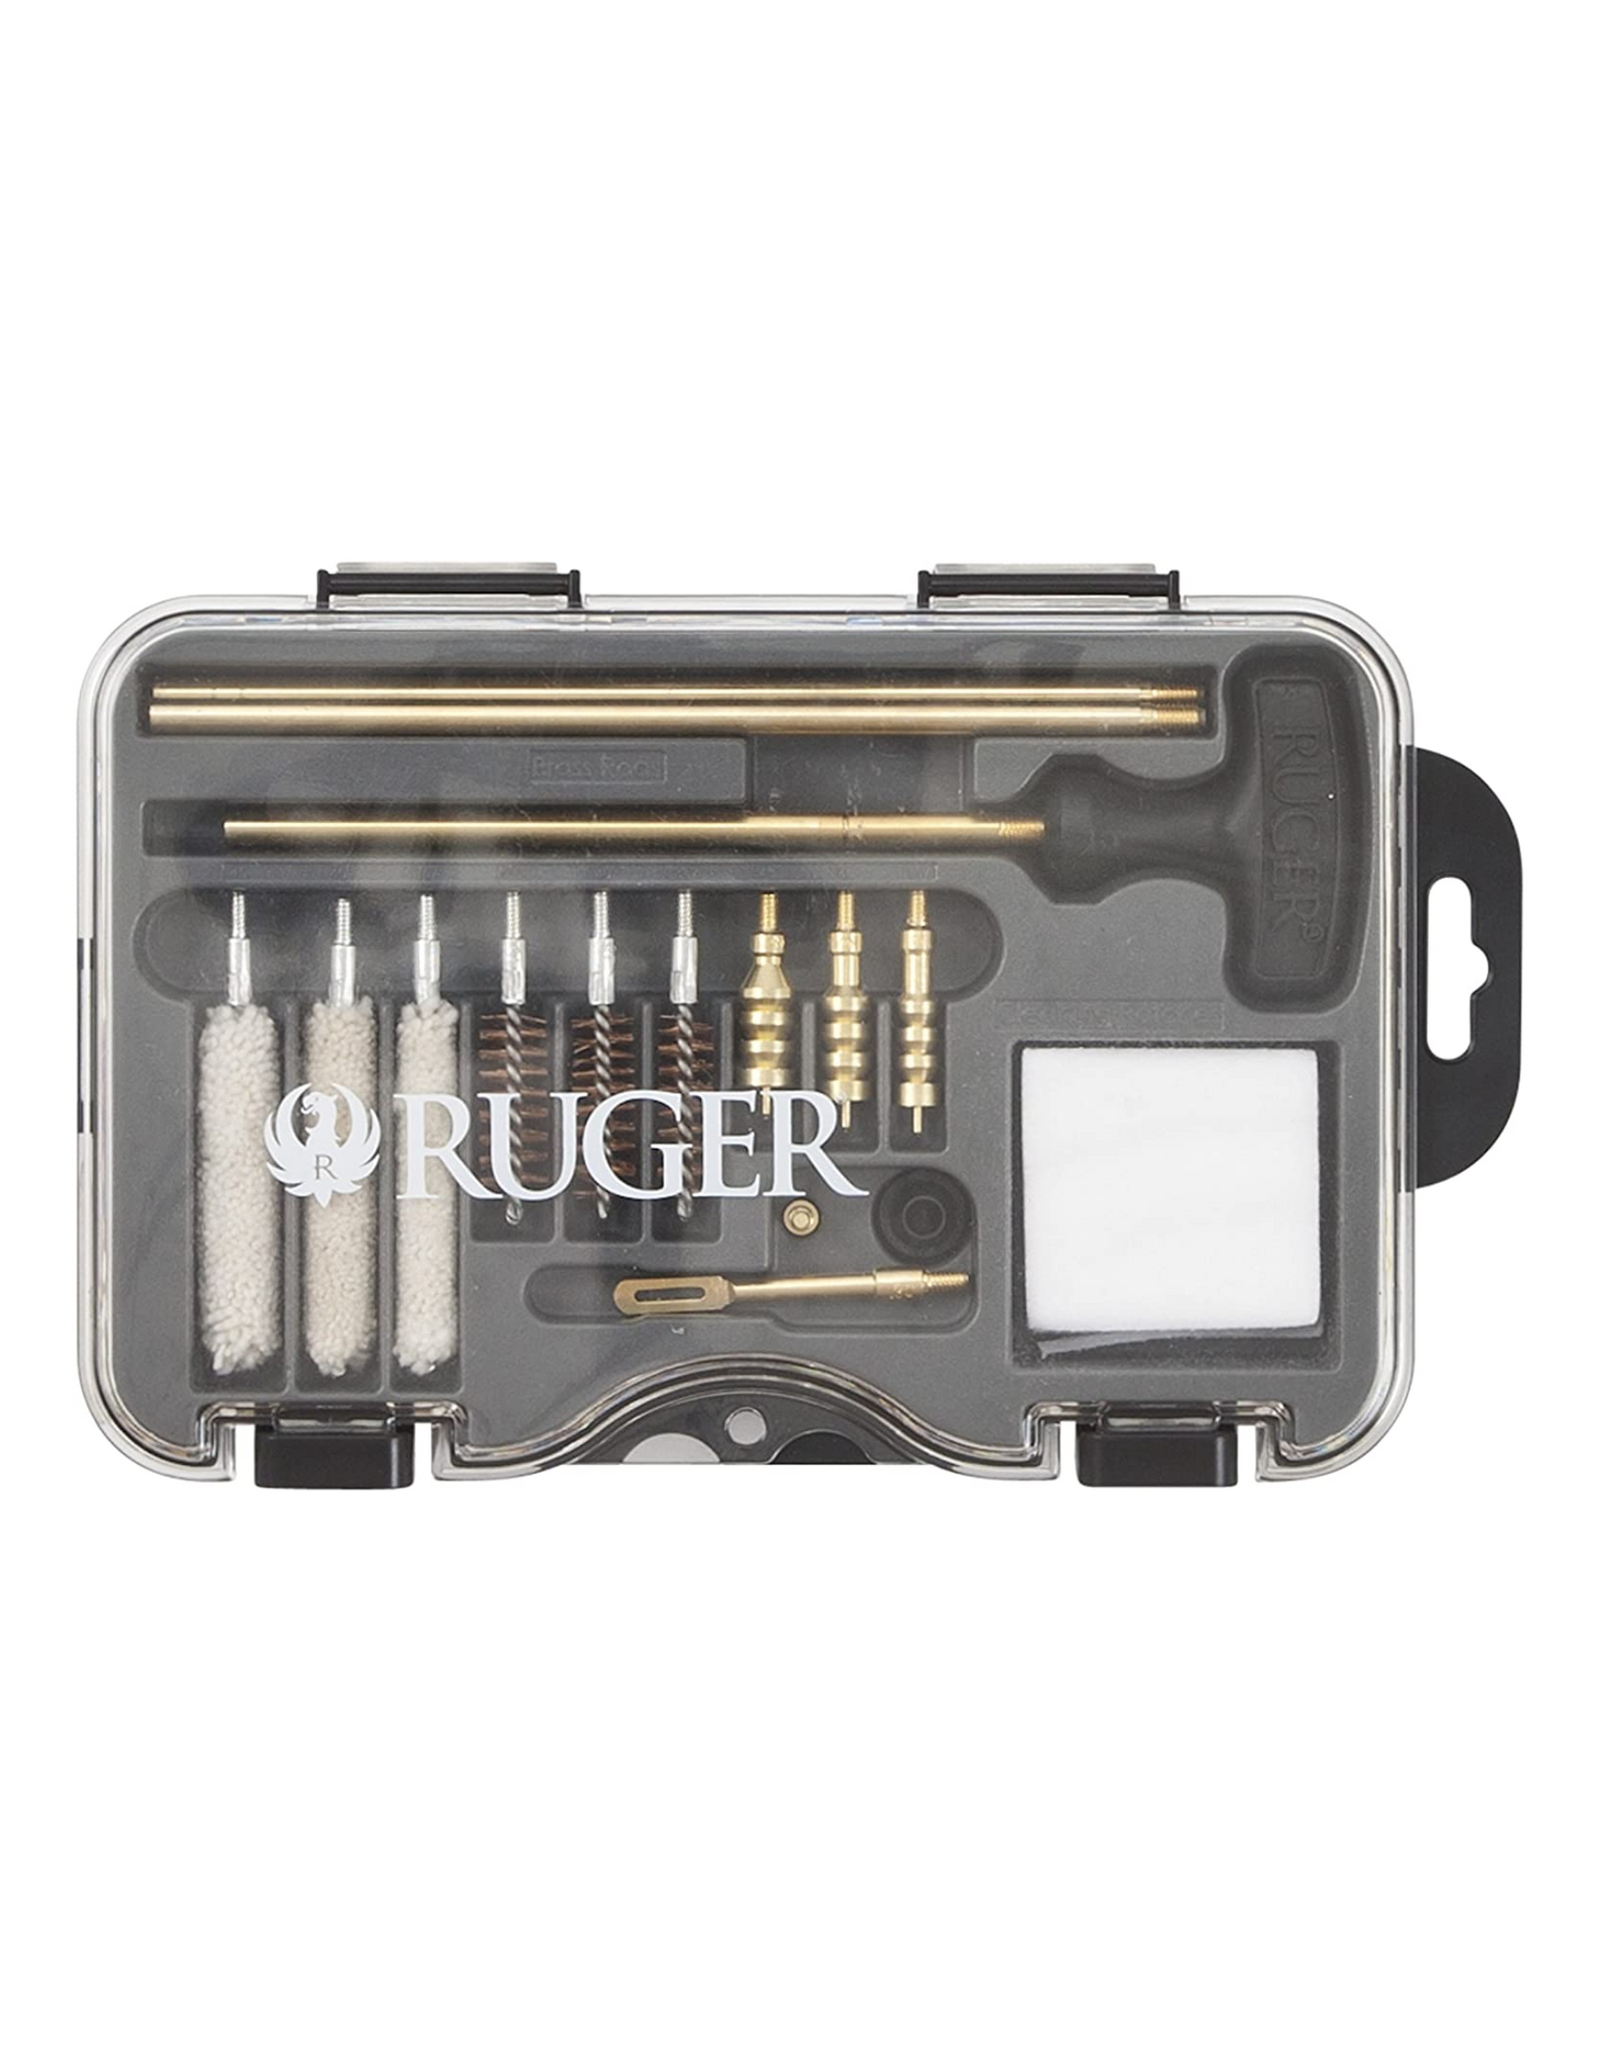 Allen Company Ruger Universal Handgun Cleaning Kit - .380ACP.357 Magnum, 9mm, 10mm.40 caliber.38 special.44 Magnum and .45 acp , black